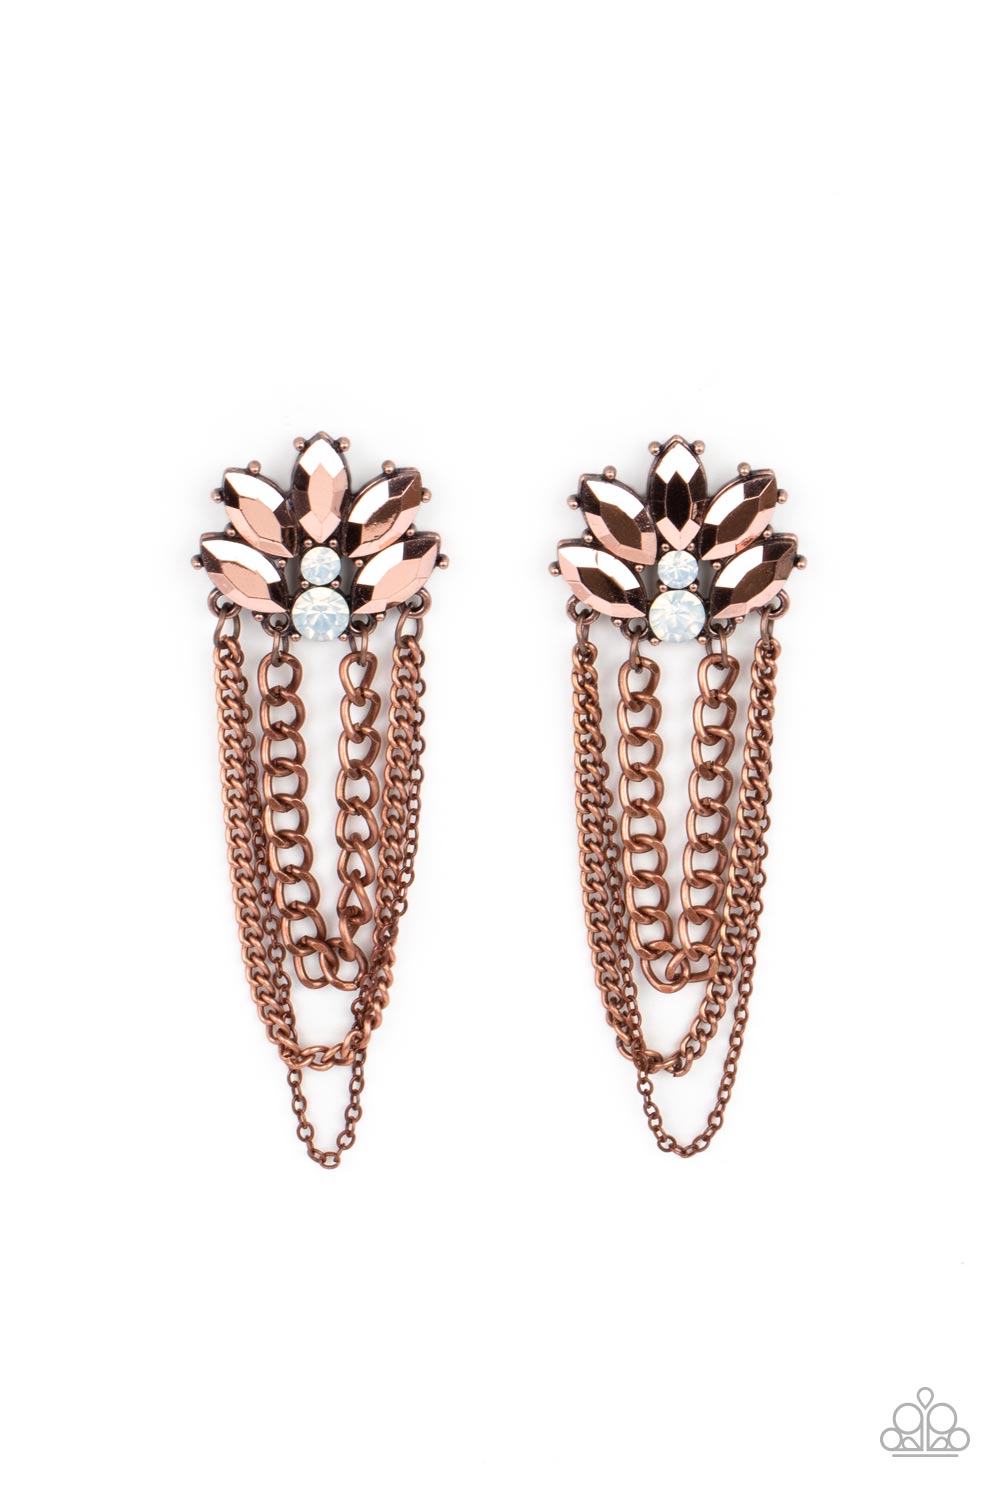 Paparazzi Reach for the SKYSCRAPERS - Copper Earrings